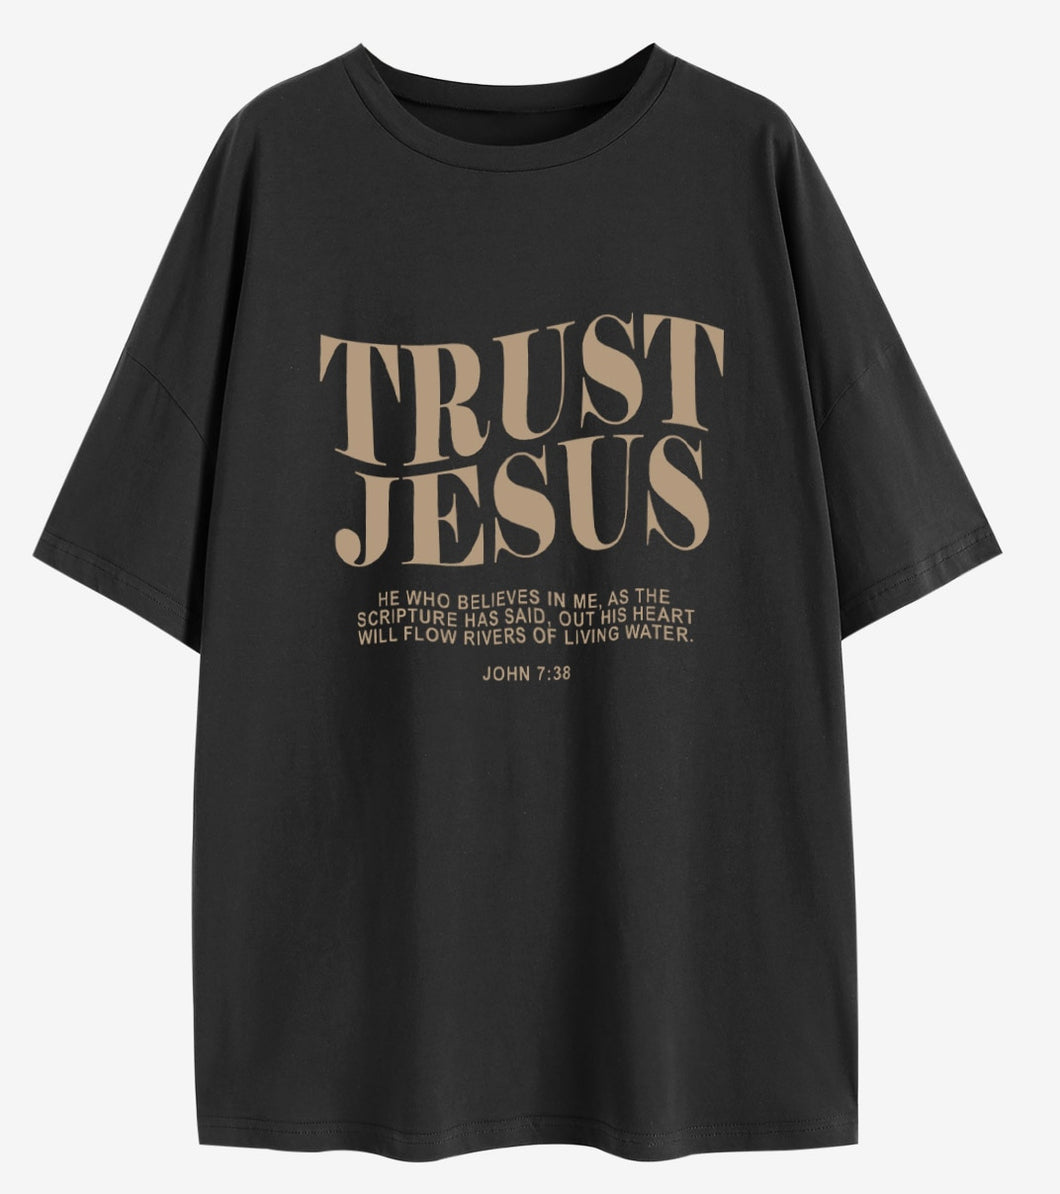 John 7:38 Everlasting Source of Life in Truth Cotton Tshirt